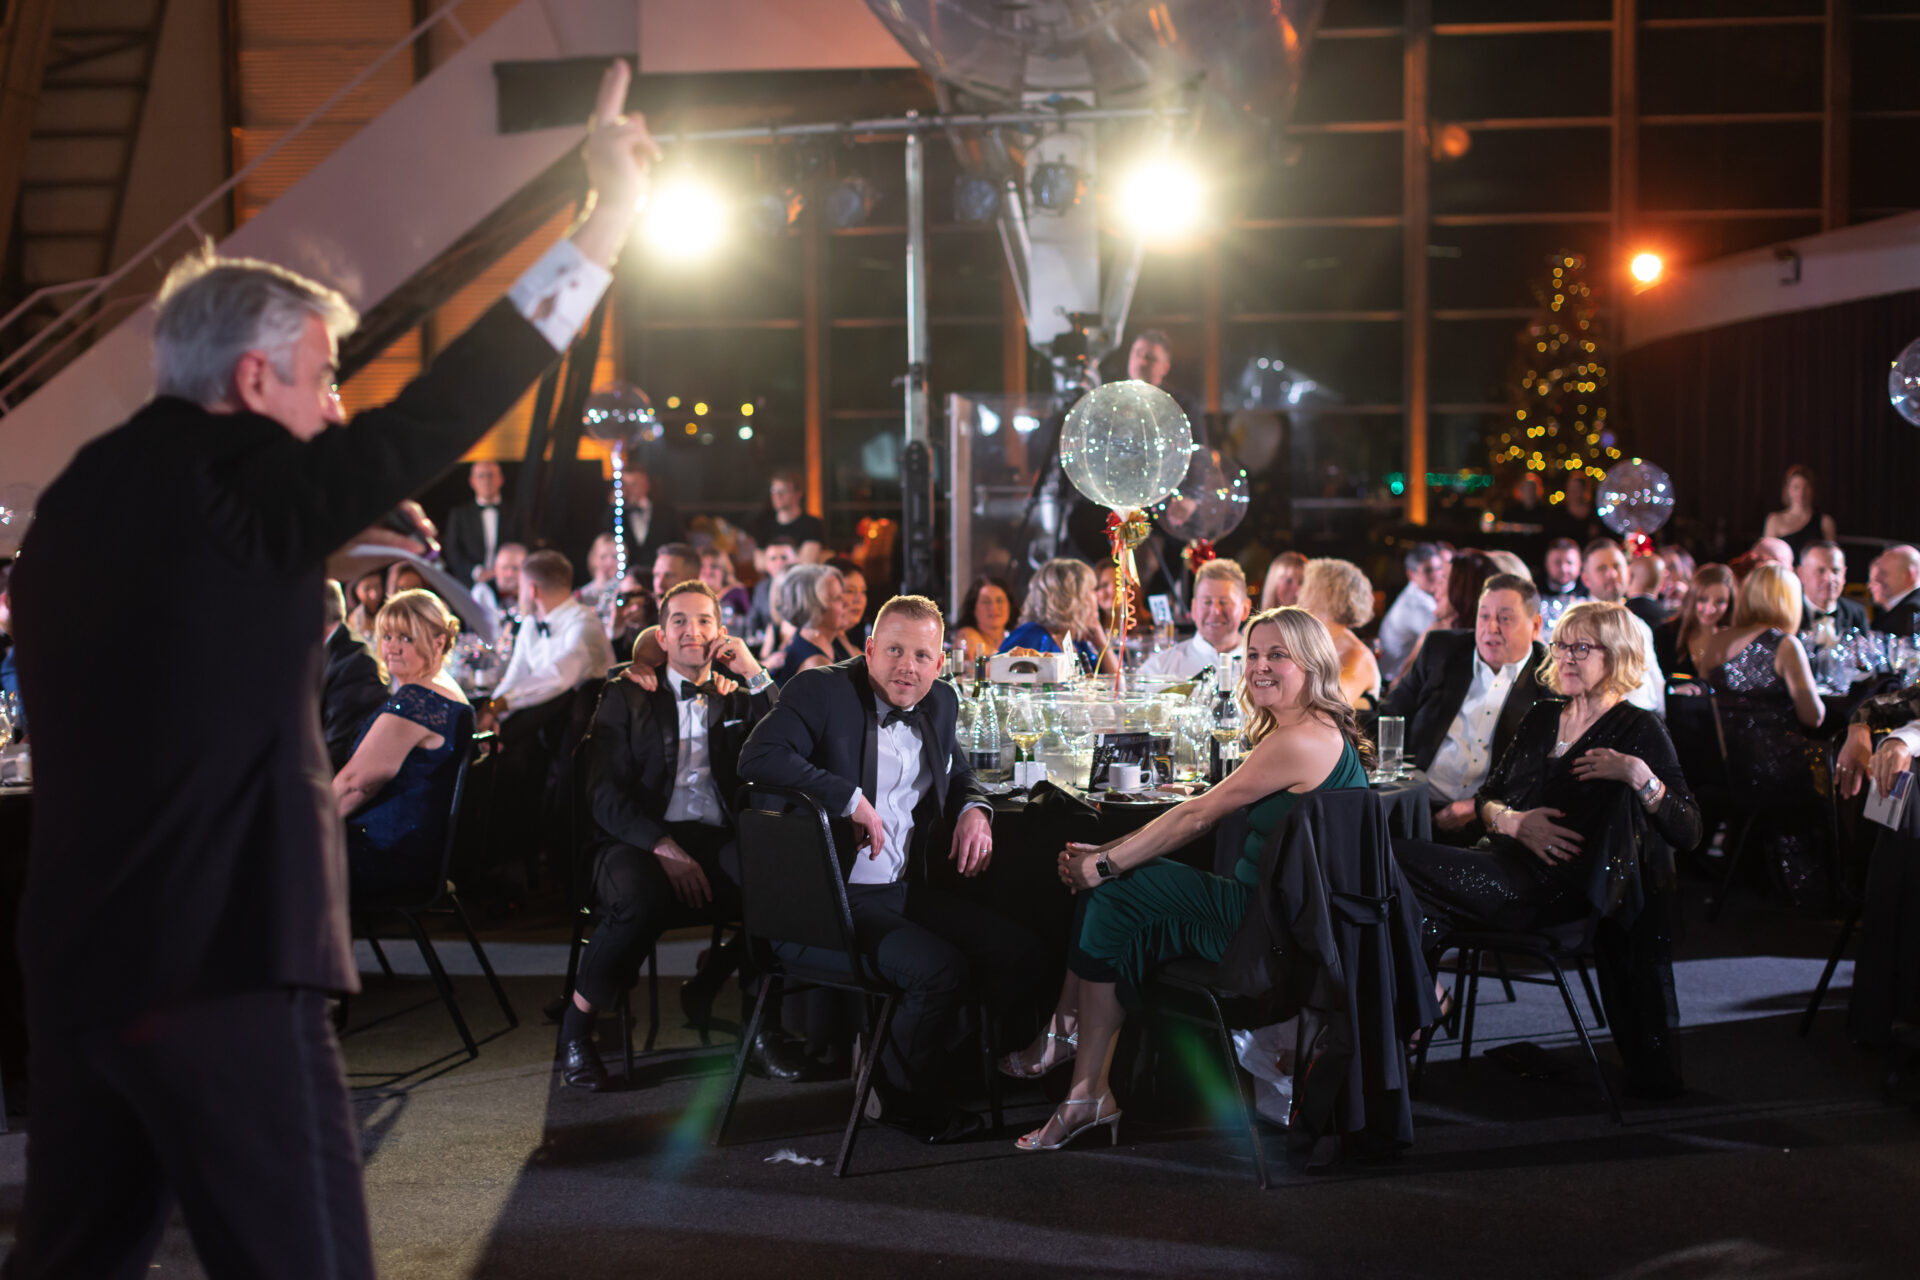 Auctioneer stood in front of audience at charity ball